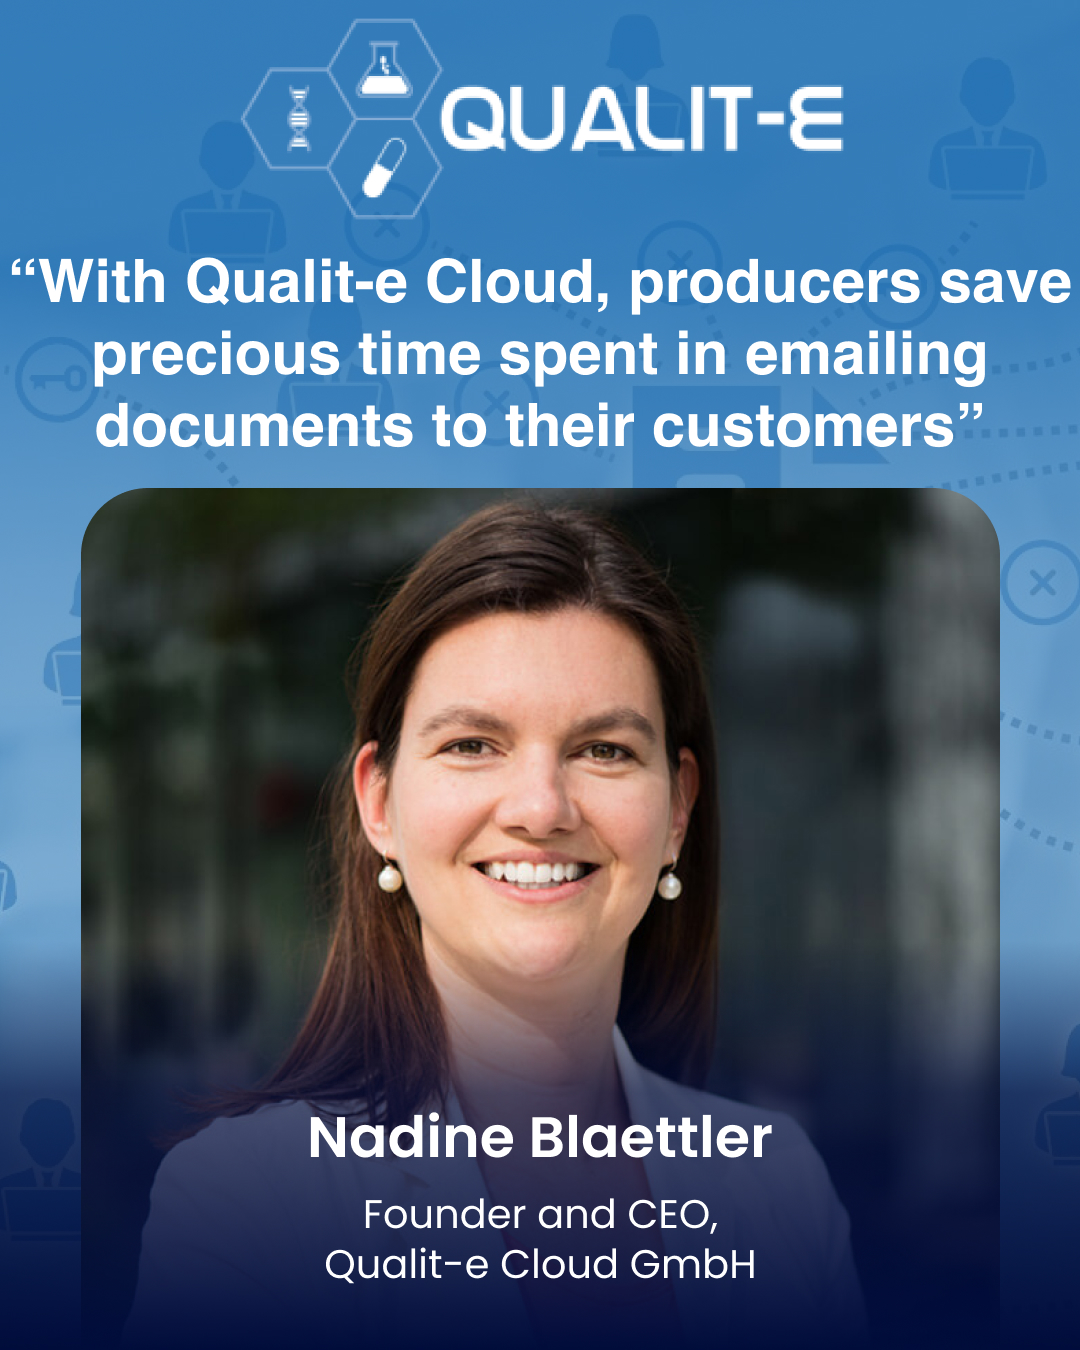 “With Qualit-e Cloud, producers save precious time spent in emailing documents to their customers”